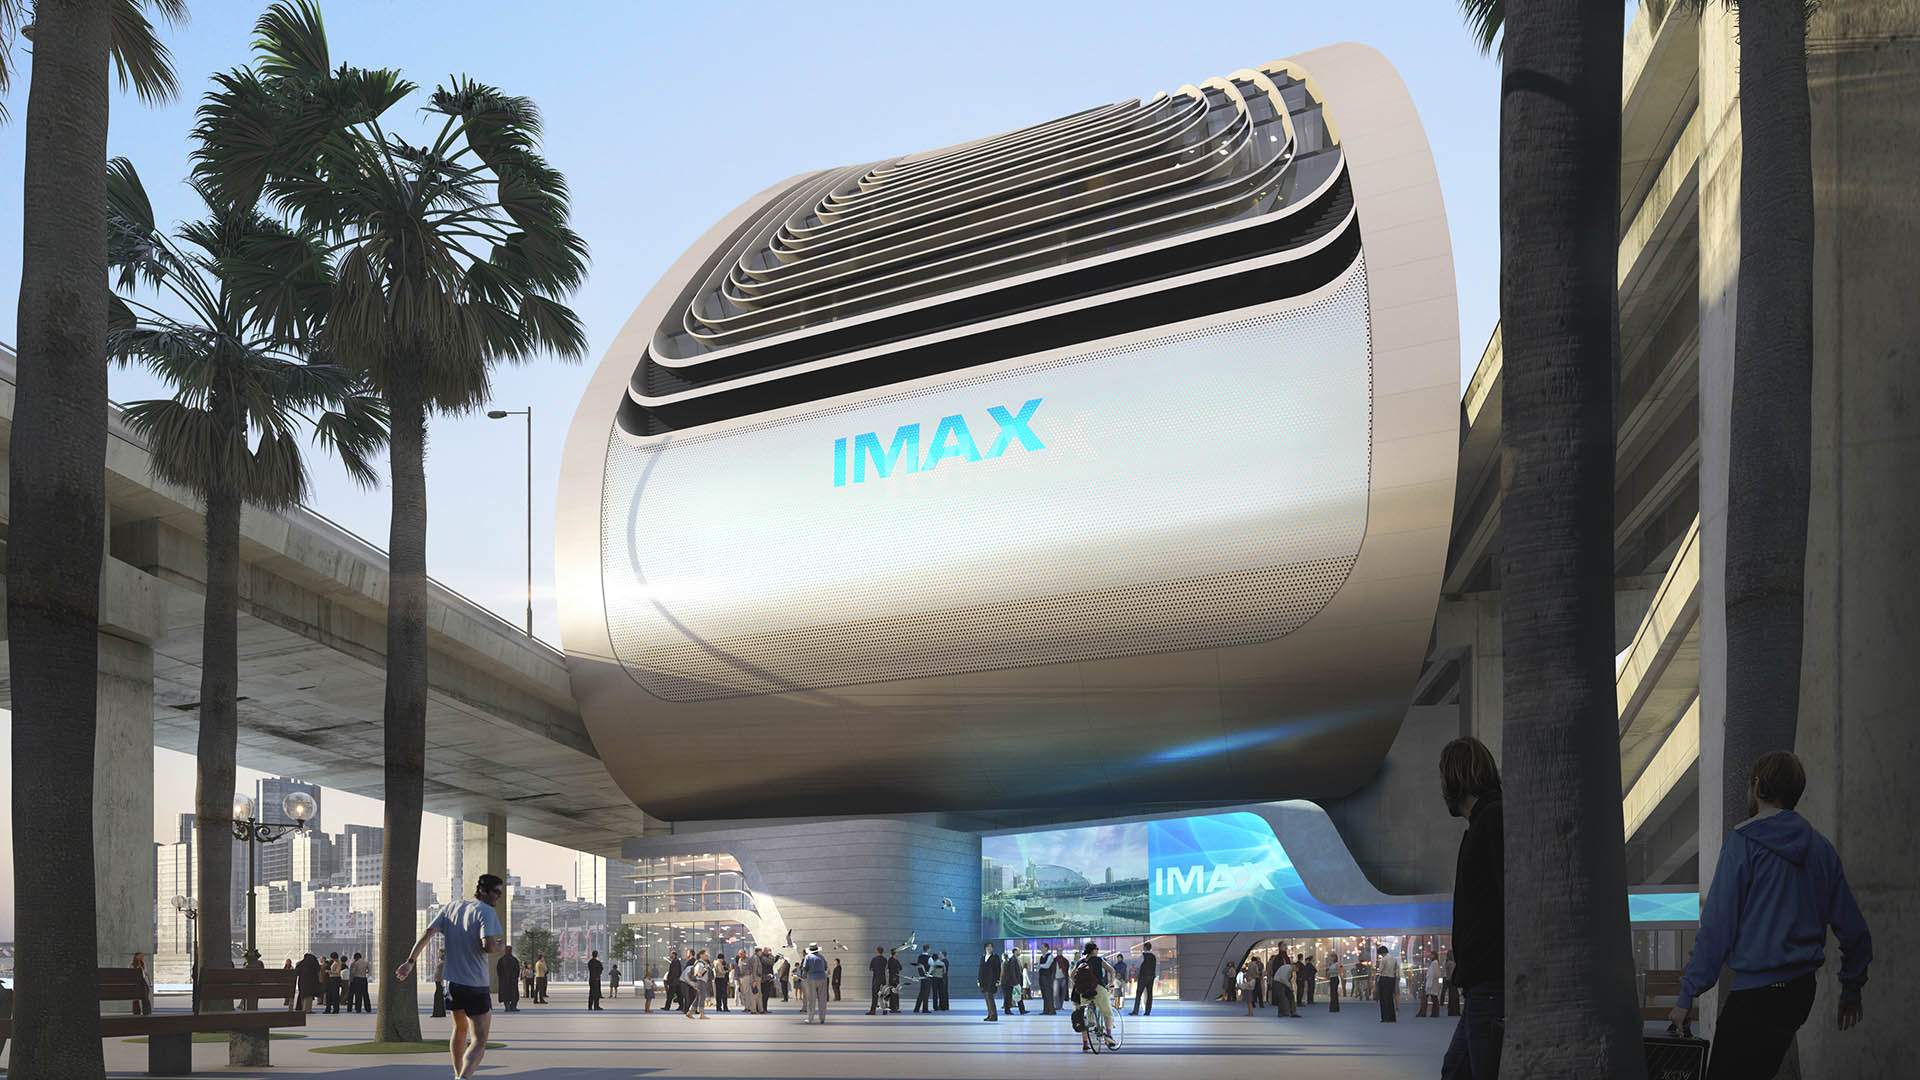 Huge News: Darling Harbour's IMAX Is Finally Set to Reopen in 2023 After Its Years-Long Rebuild